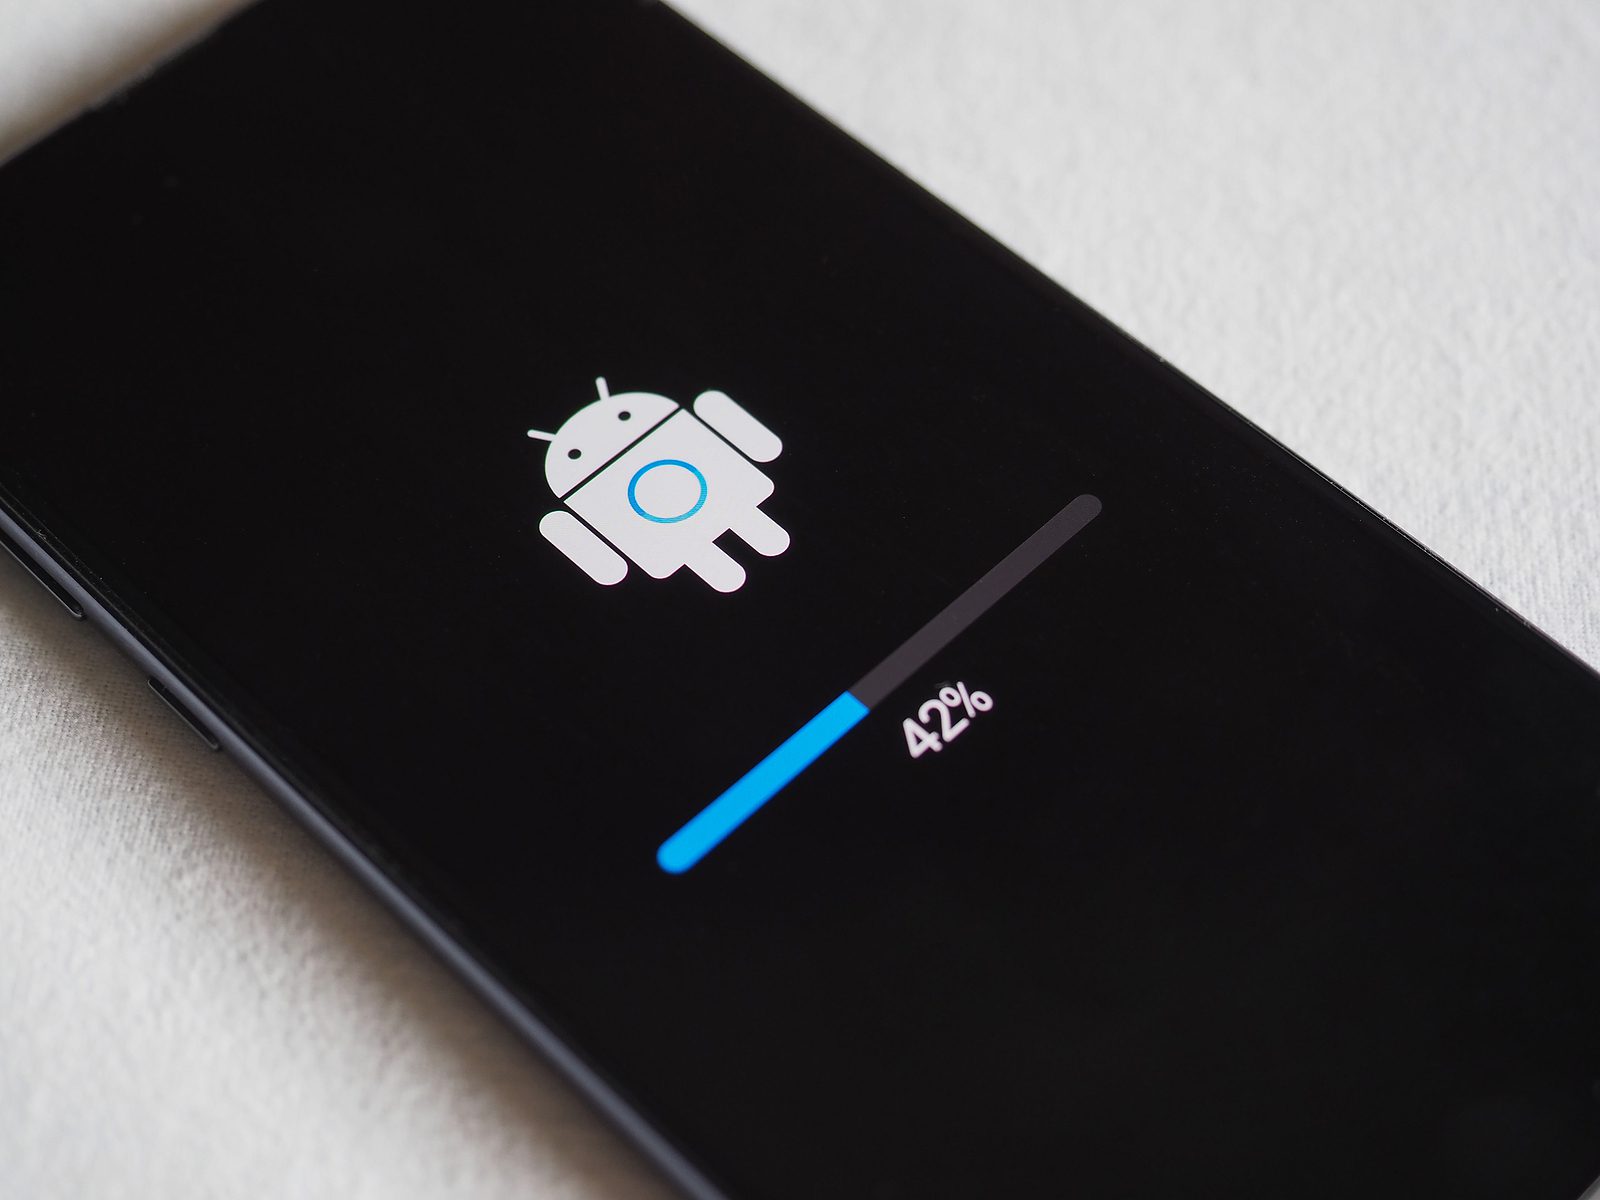 Android Security Updates Patch 3 Exploited Vulnerabilities – Source: www.securityweek.com